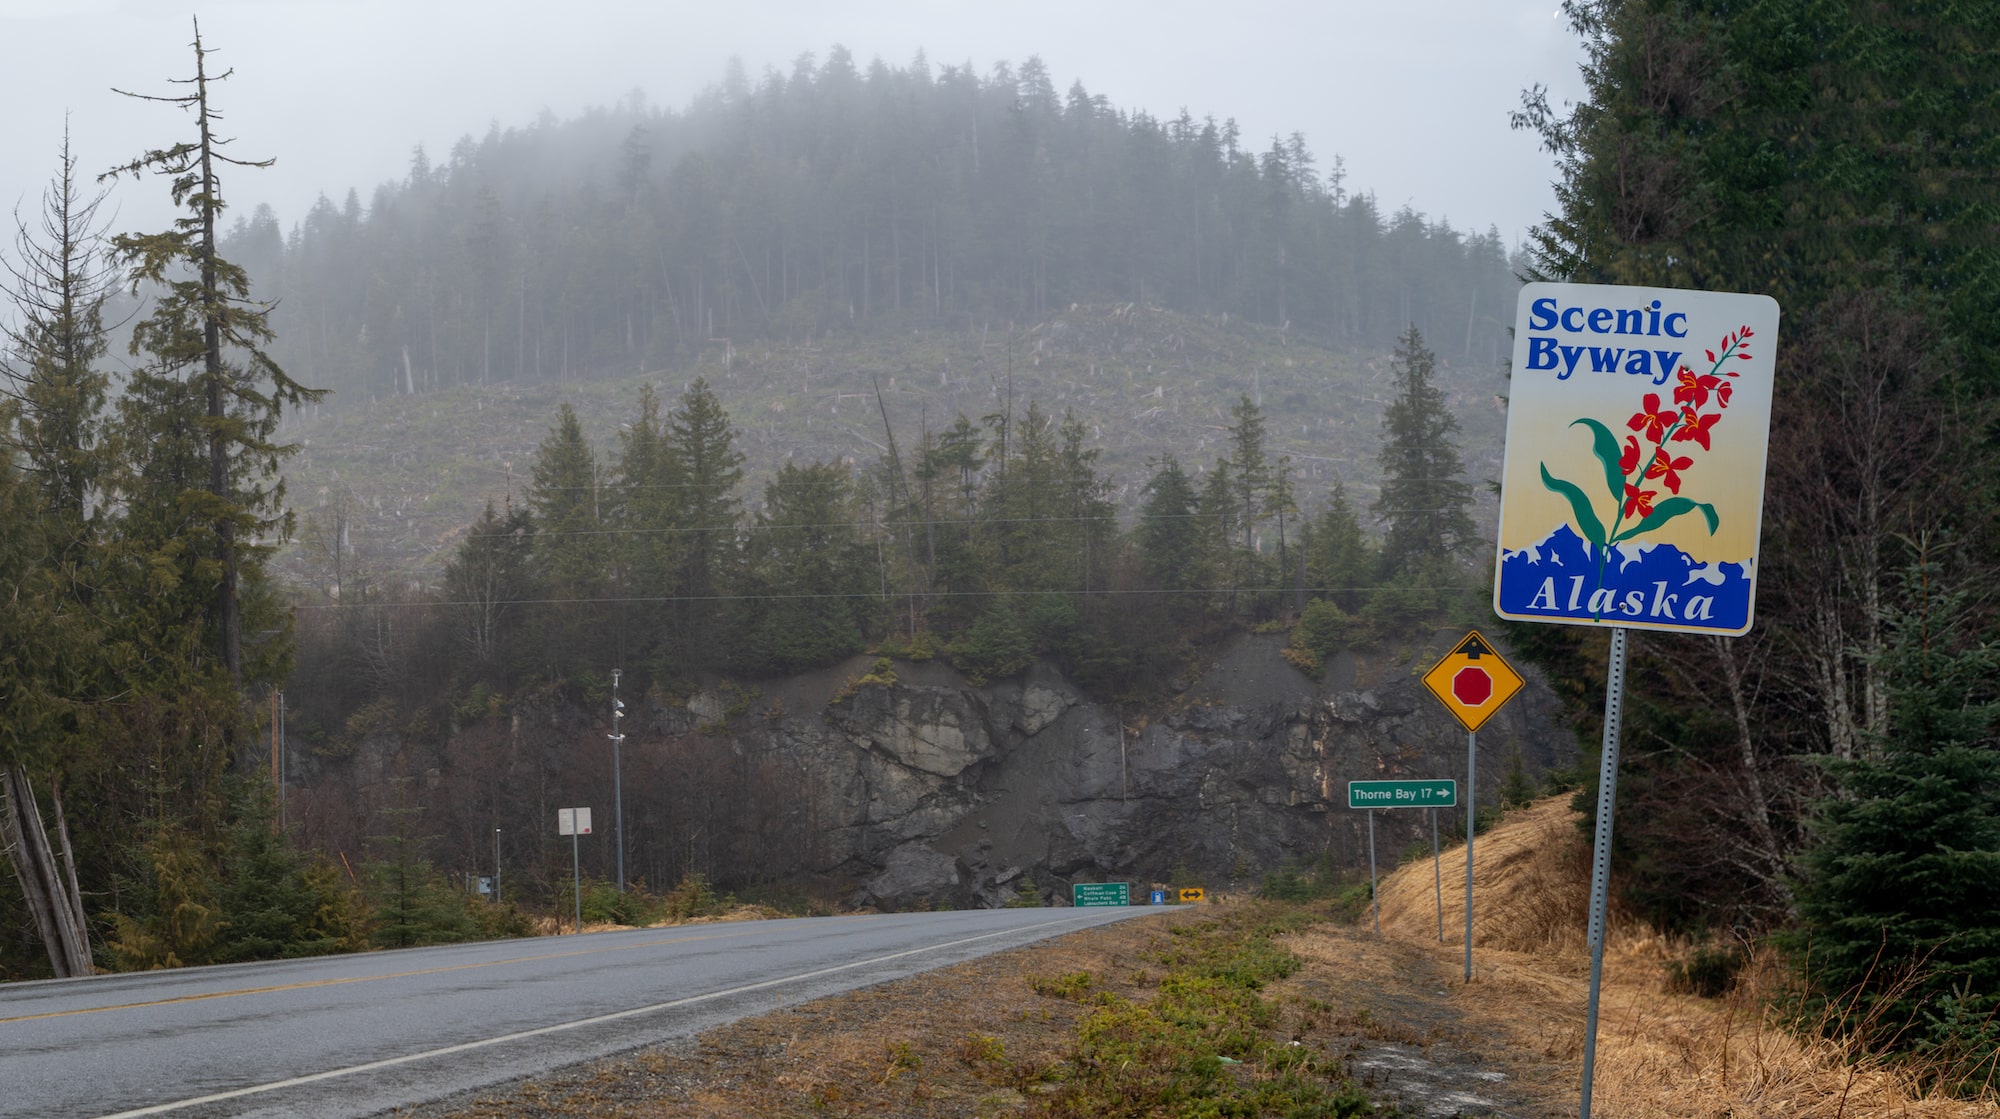 a highway with a sign on the side saying "scenic byway alaska" and a picture of a red flower on it